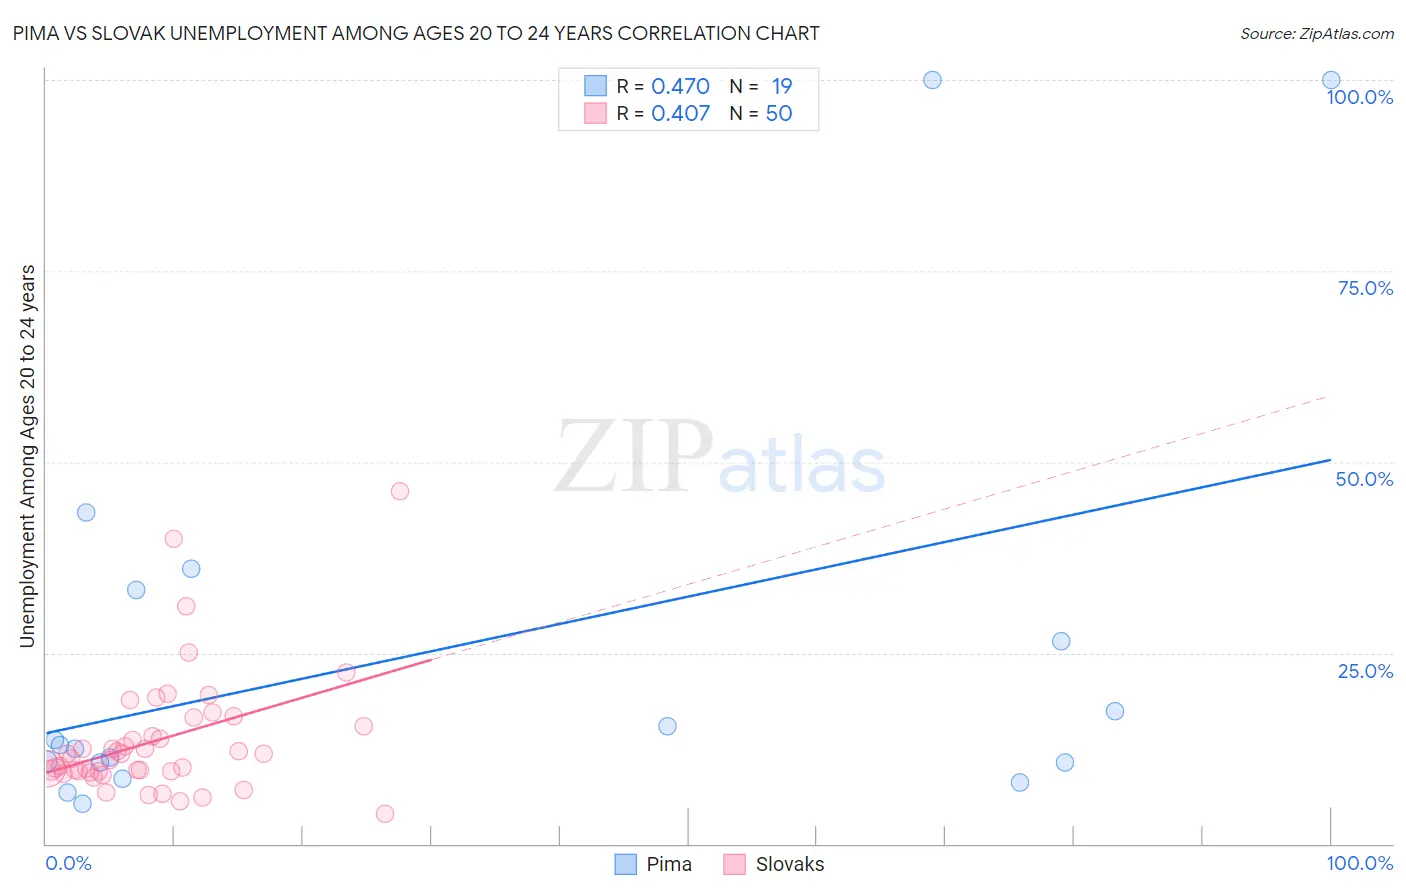 Pima vs Slovak Unemployment Among Ages 20 to 24 years